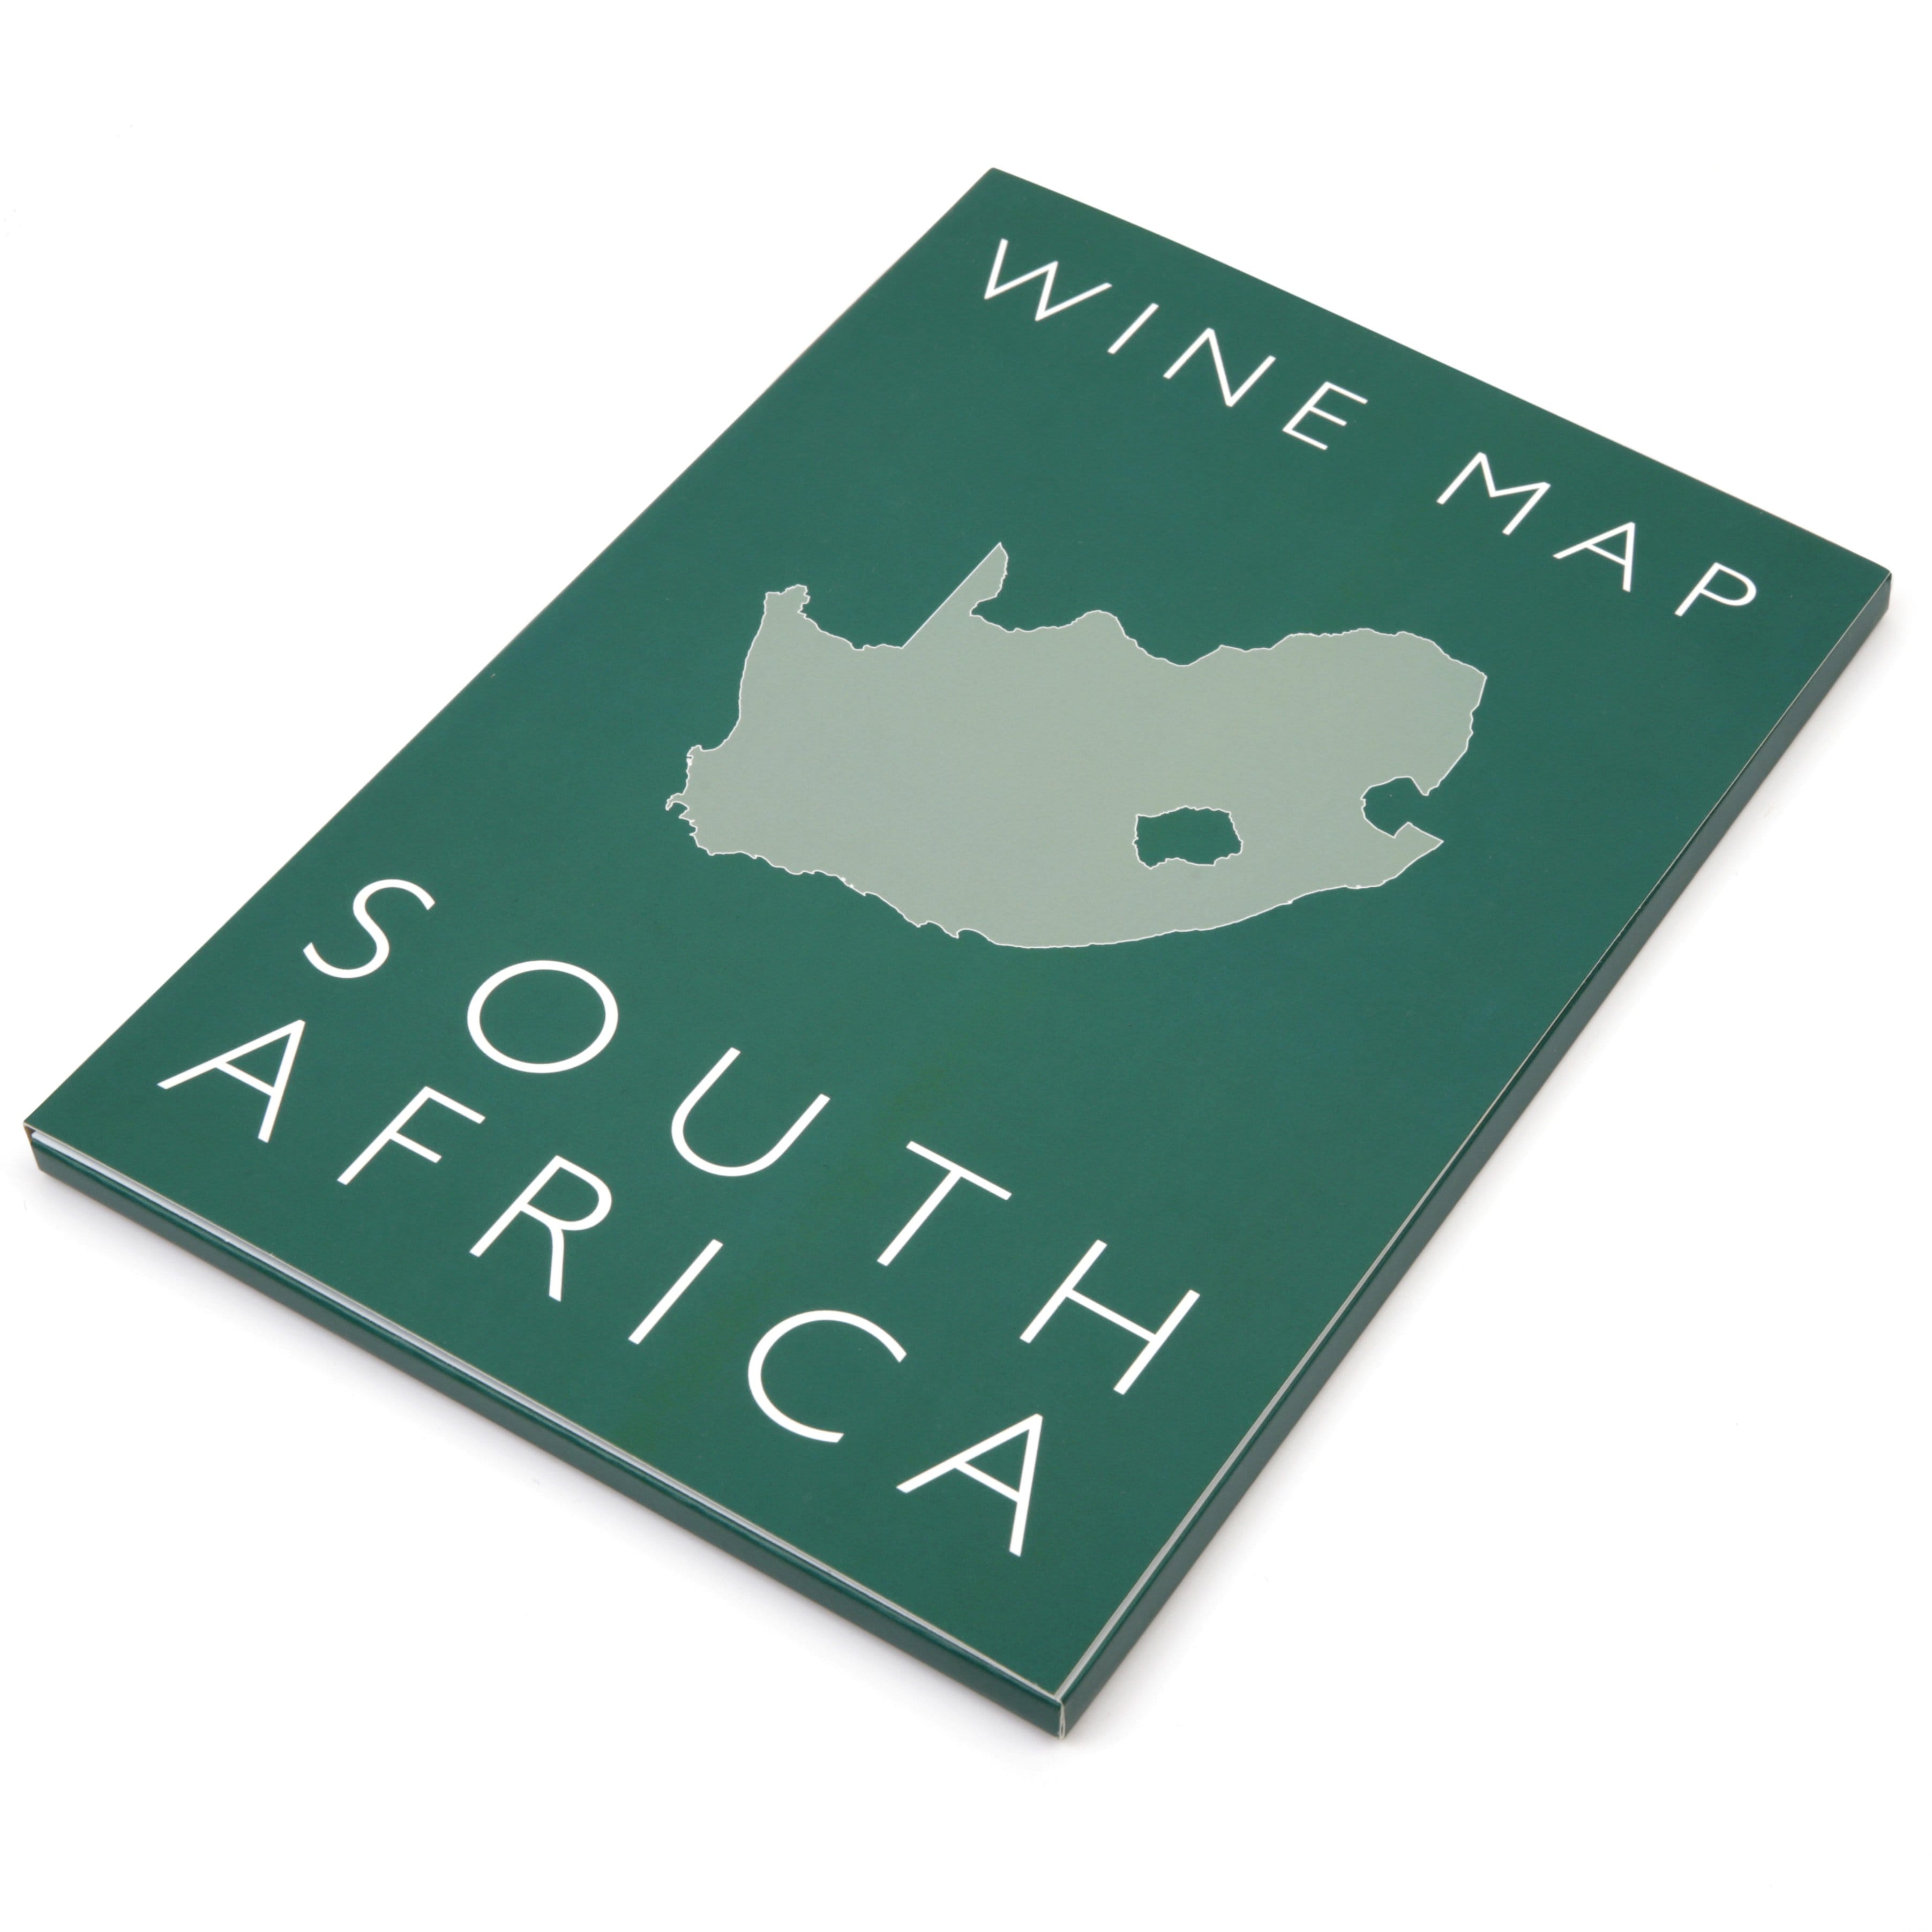 South Africa [Book]